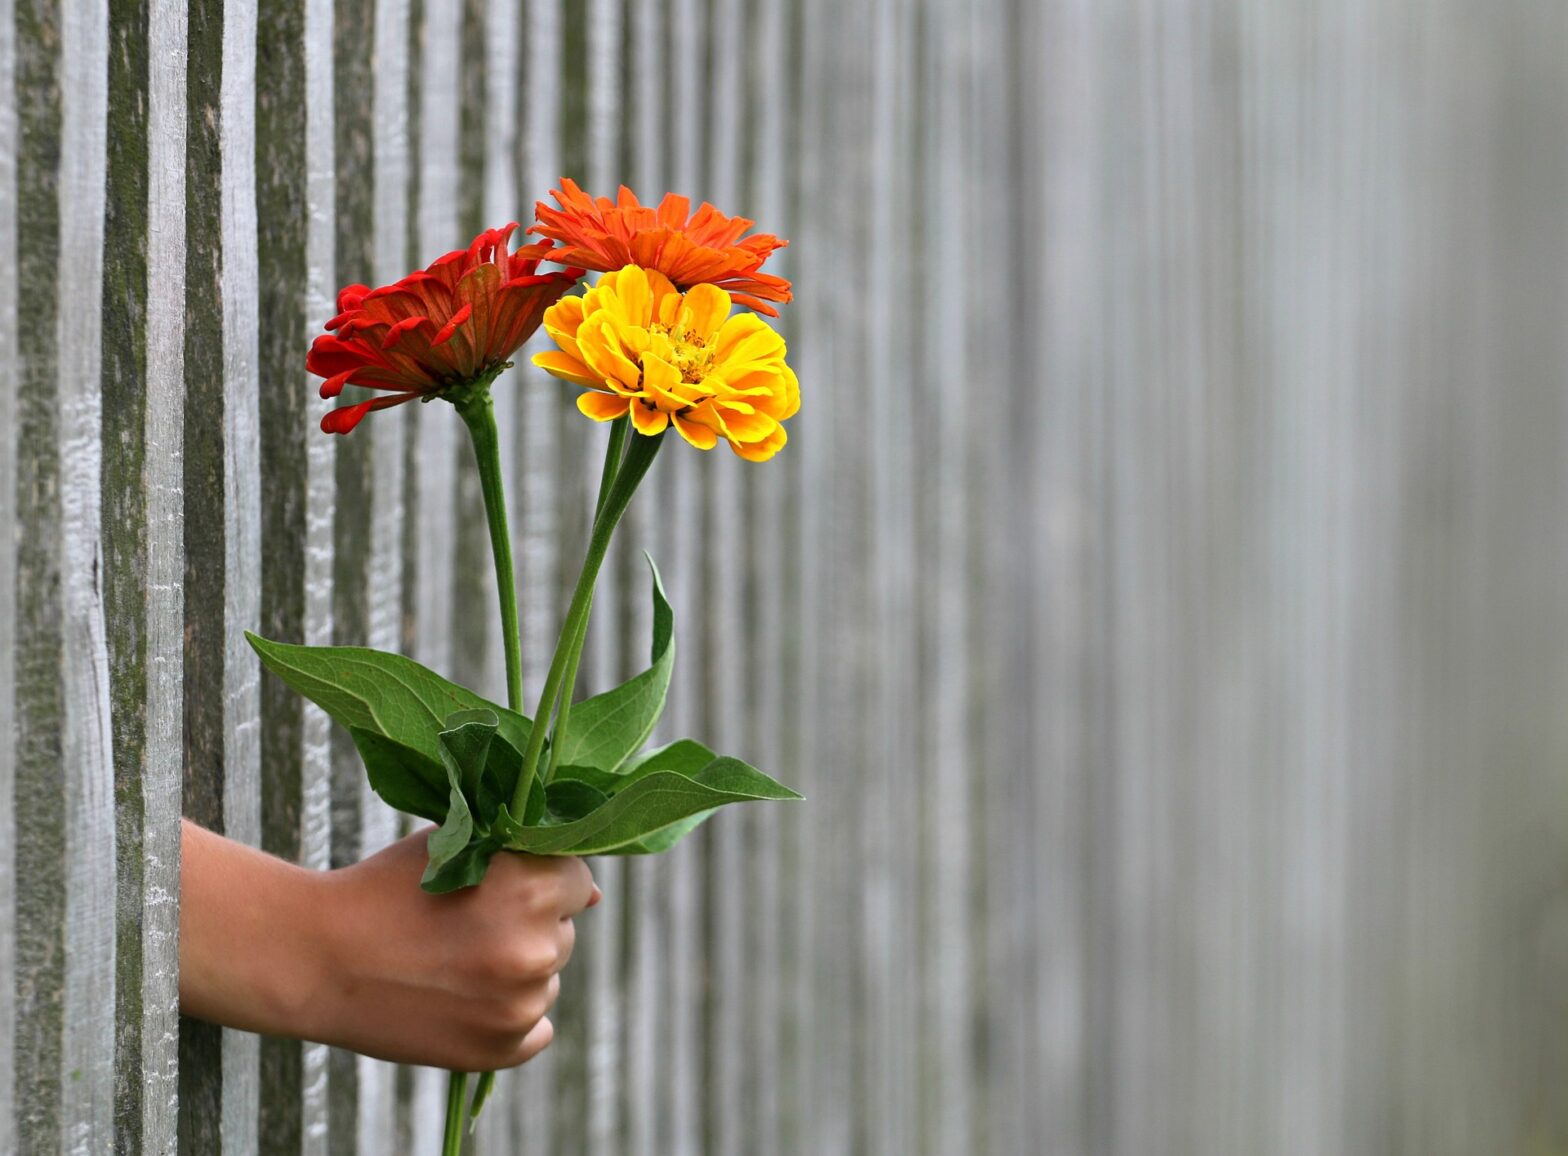 A child's hand passing a bunch of sustainable flowers through a fence. Image by svklimkin from Pixabay